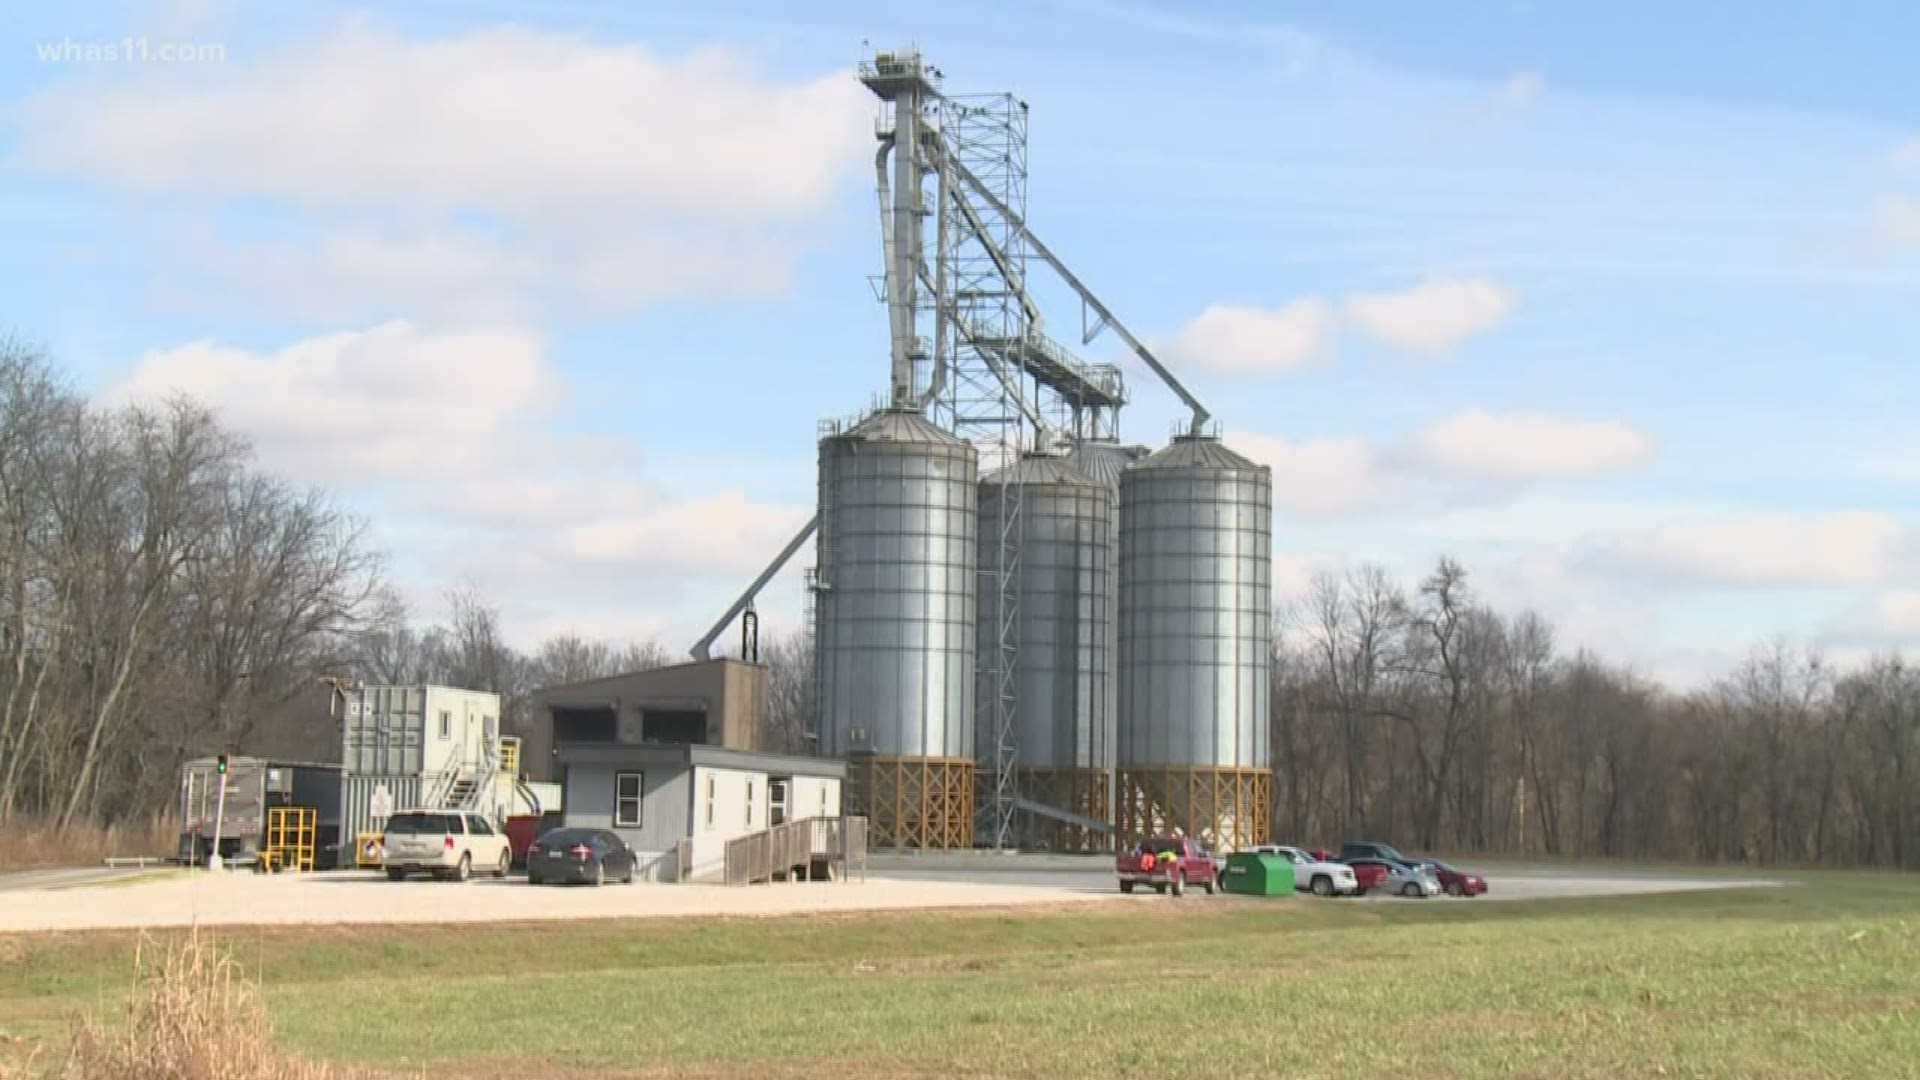 A group of farmers filed a restraining order and lawsuit claiming that county officials violated state laws and the Open Meetings Act to get a $1.3 billion steel pla